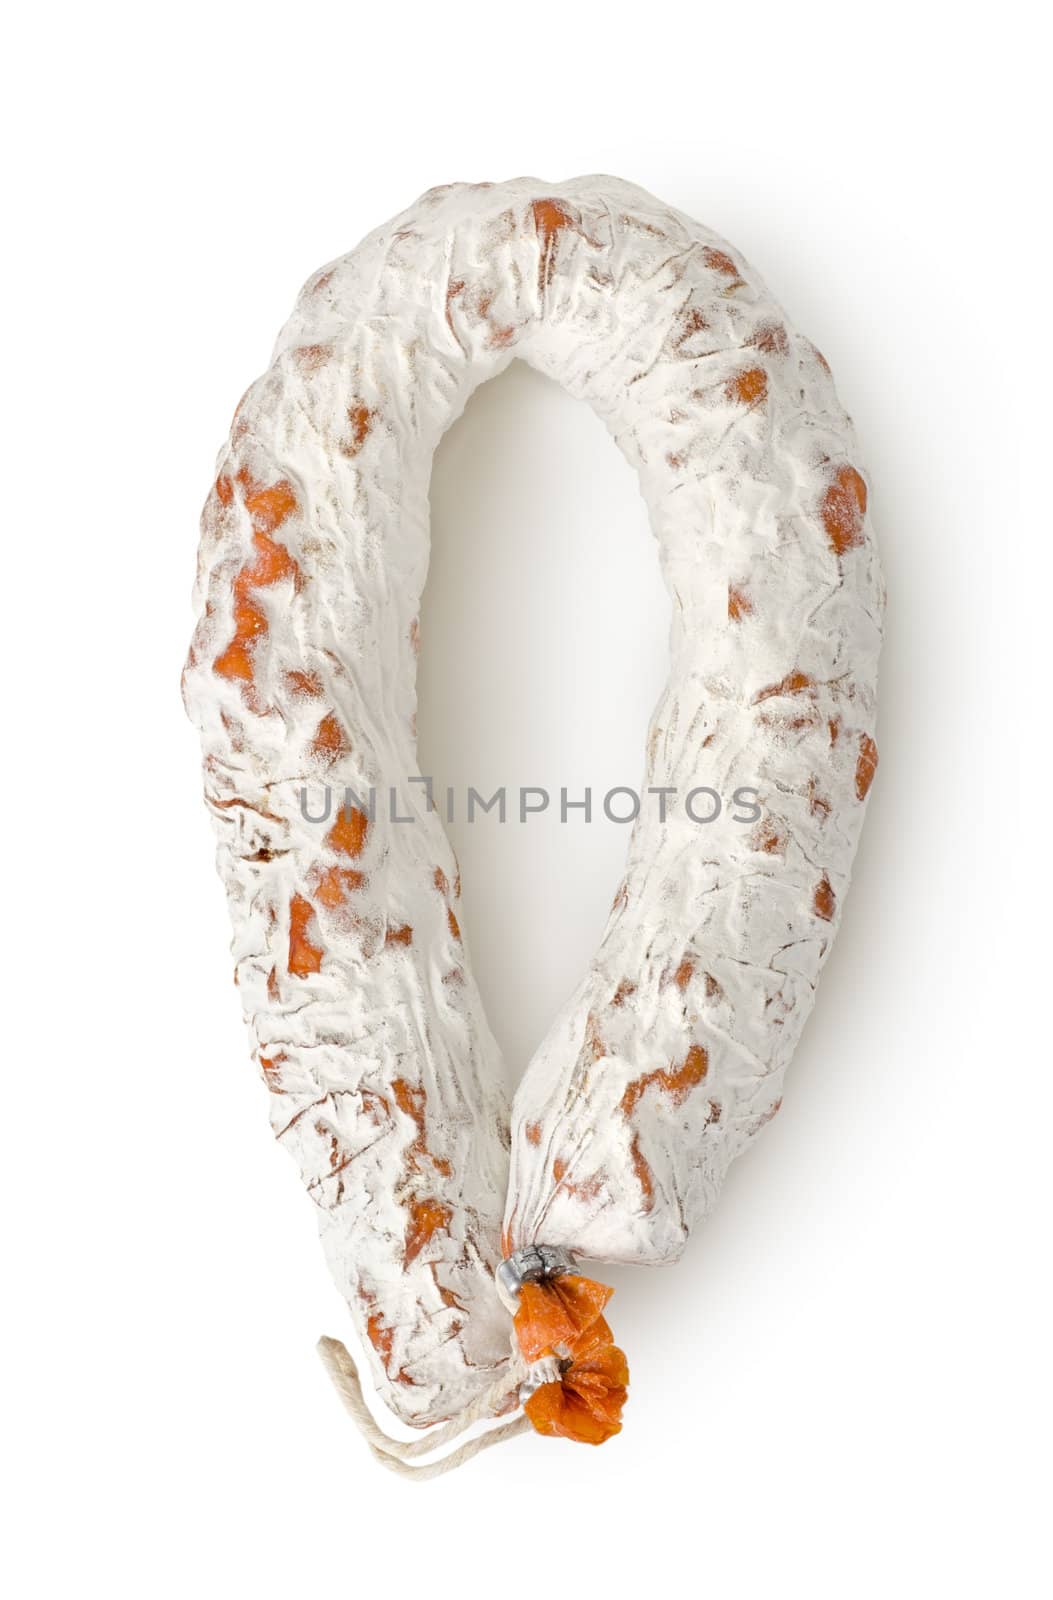 Salami sausage isolated on a white background. Clipping Path